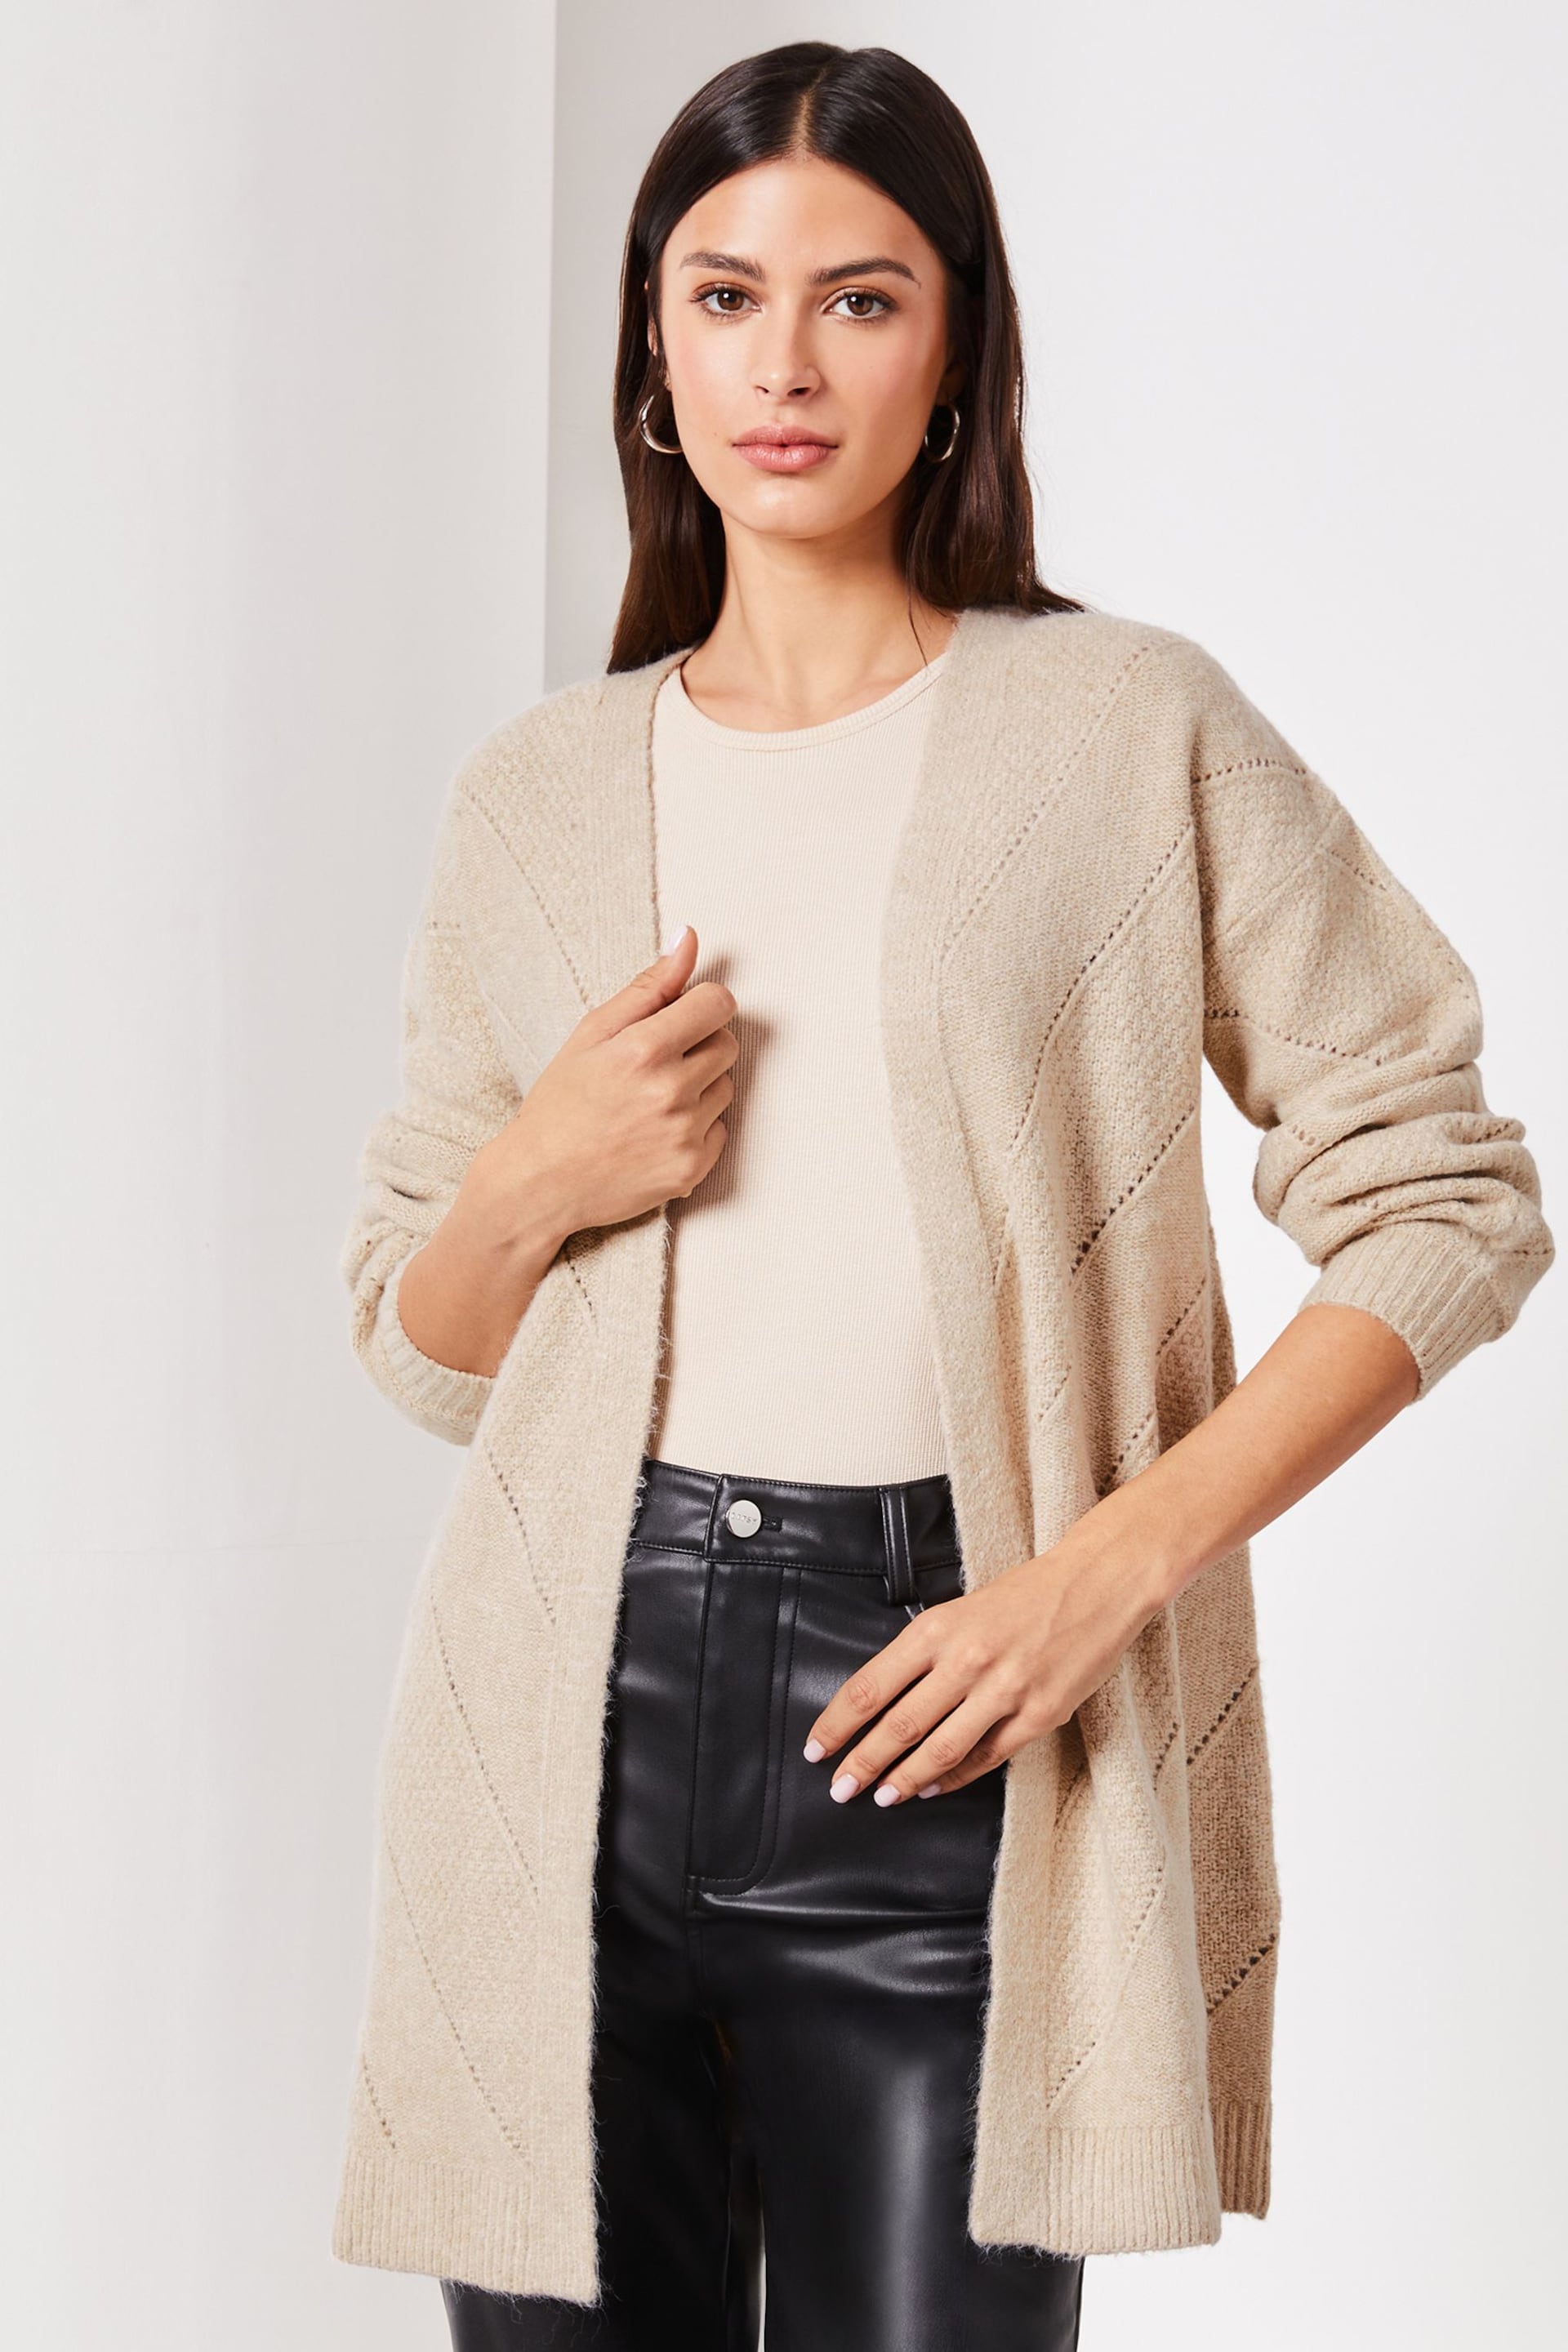 Lipsy Neutral Long Sleeve Pointelle Knitted Cardigan - Image 1 of 4